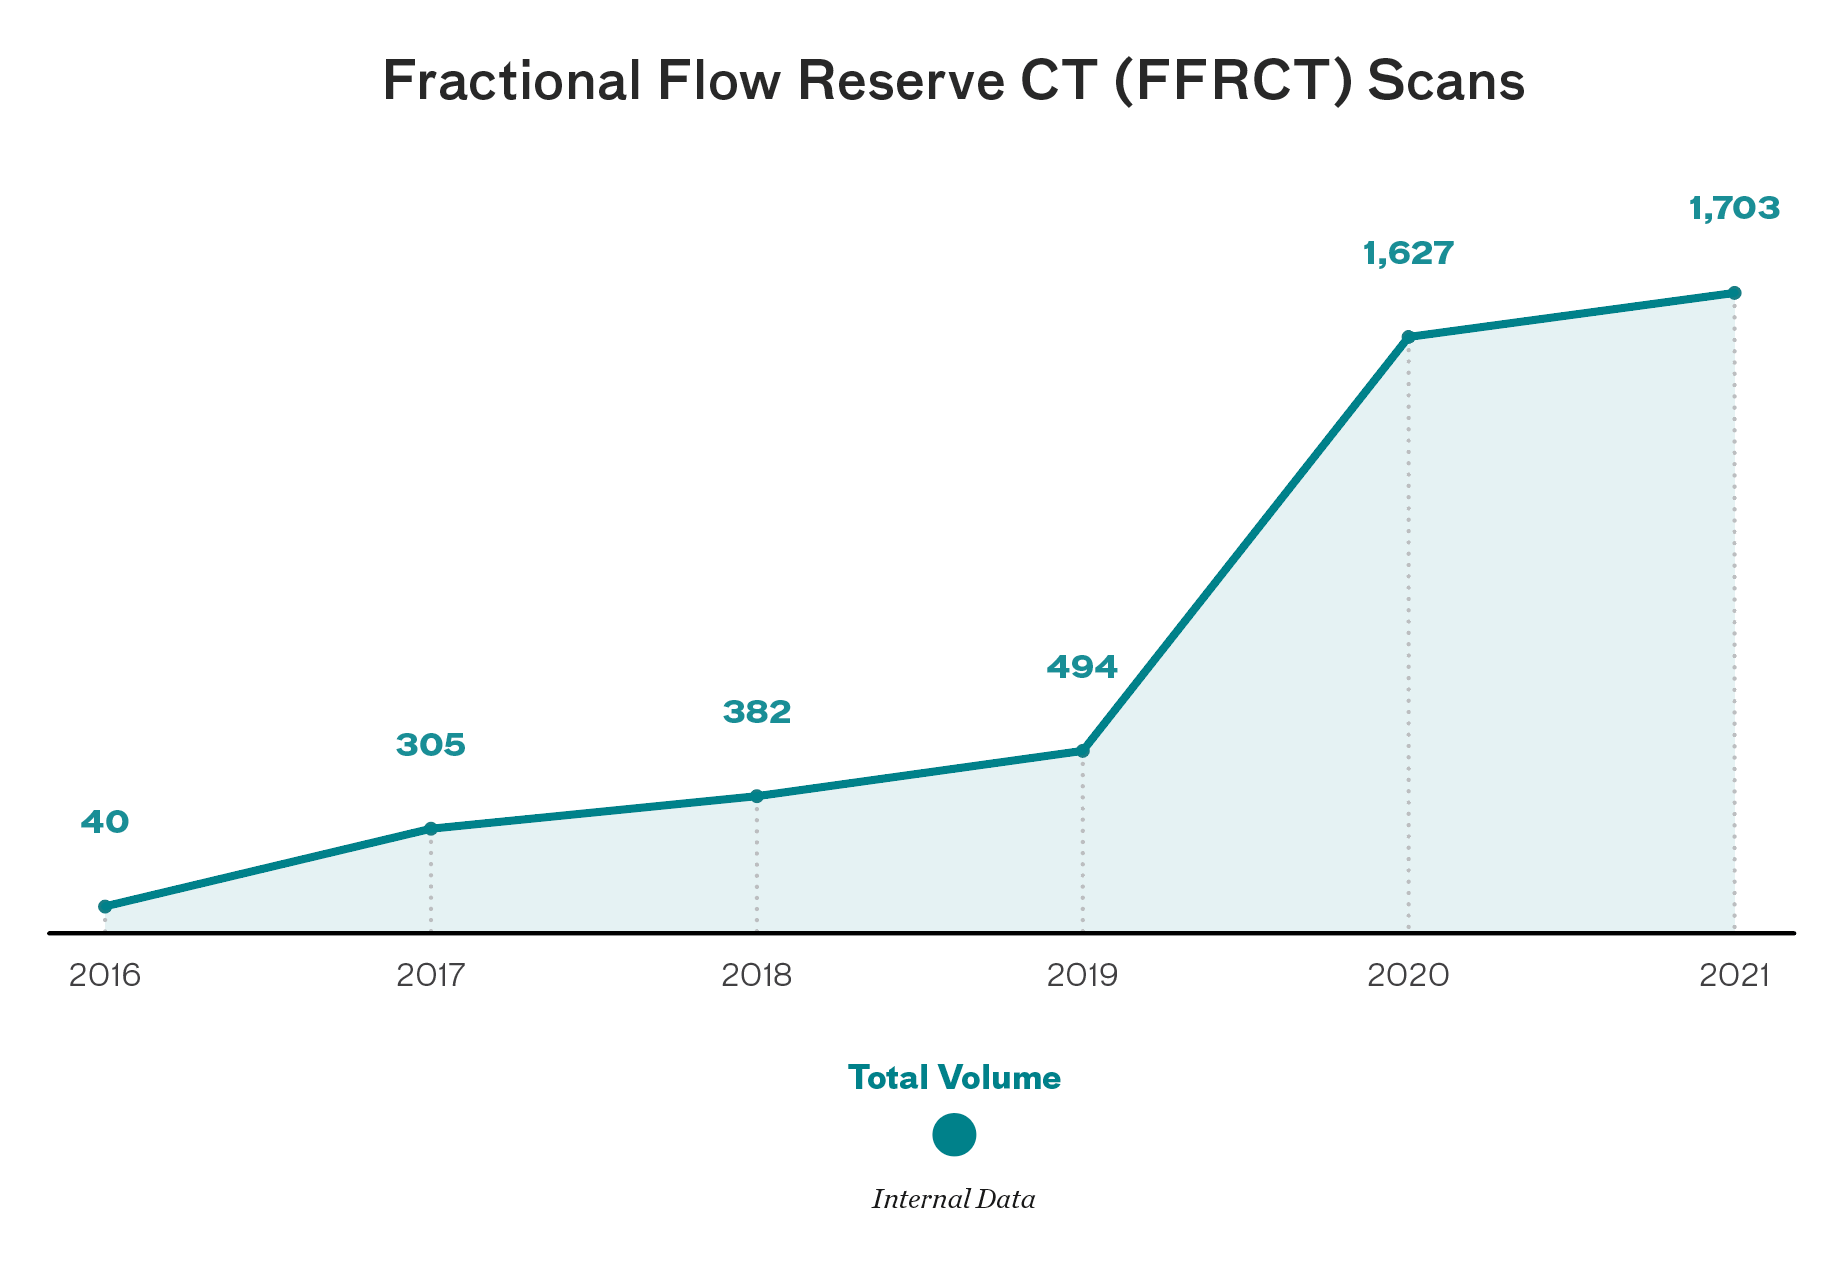 Chart showing an increase in Fractional Flow Reserve CT (FFRCT) Scans, from 40 in 2016 to 1,703 in 2021.